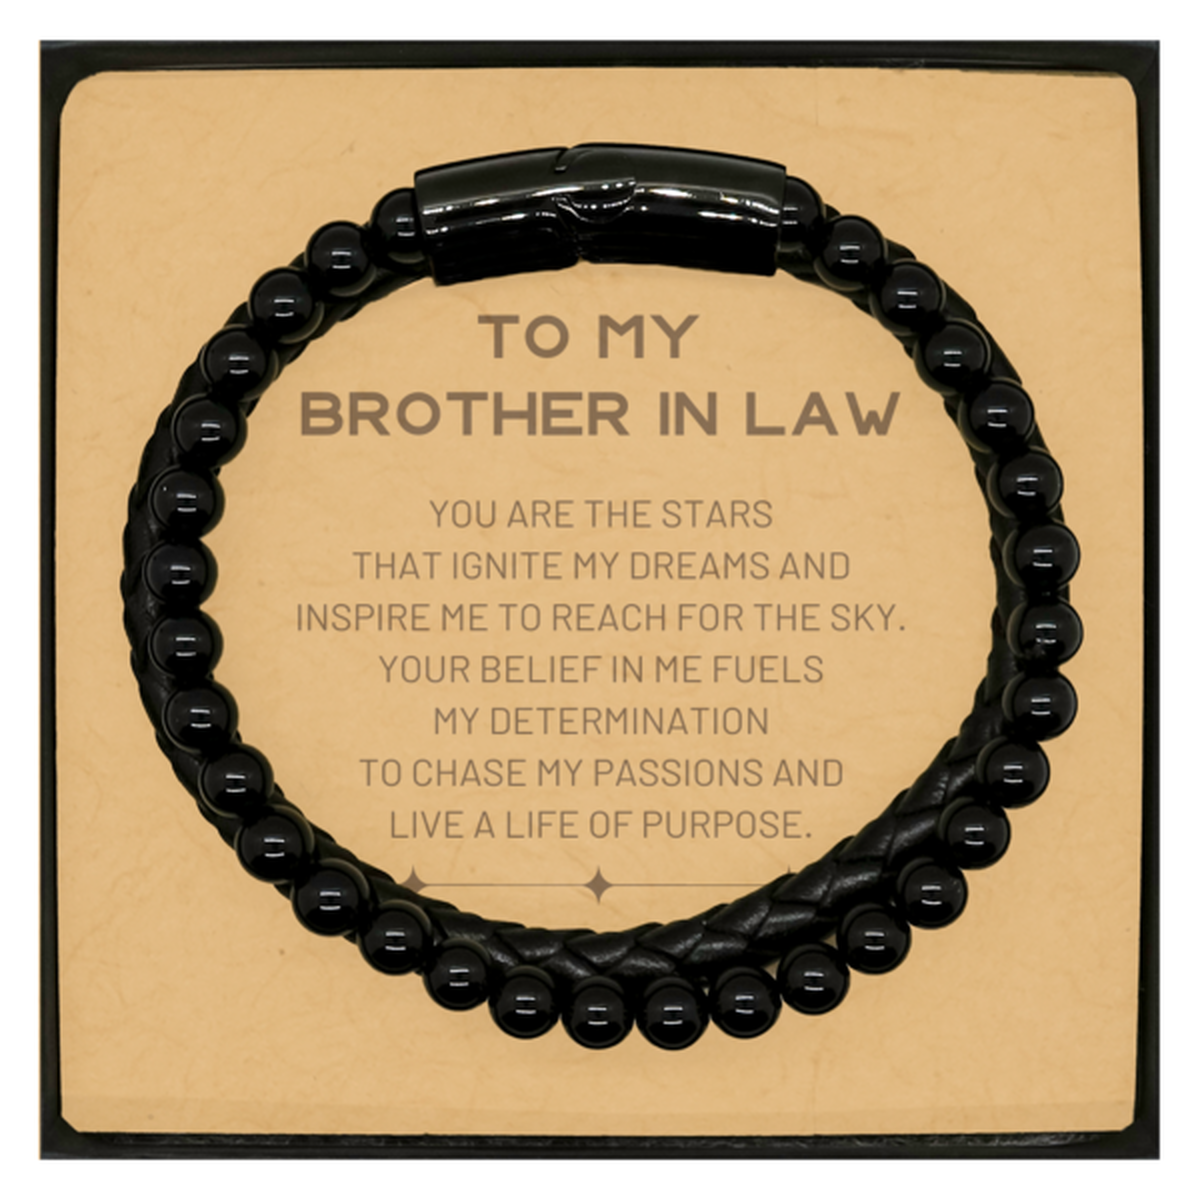 To My Brother In Law Stone Leather Bracelets, You are the stars that ignite my dreams and inspire me to reach for the sky, Birthday Christmas Unique Gifts For Brother In Law, Thank You Gifts For Brother In Law